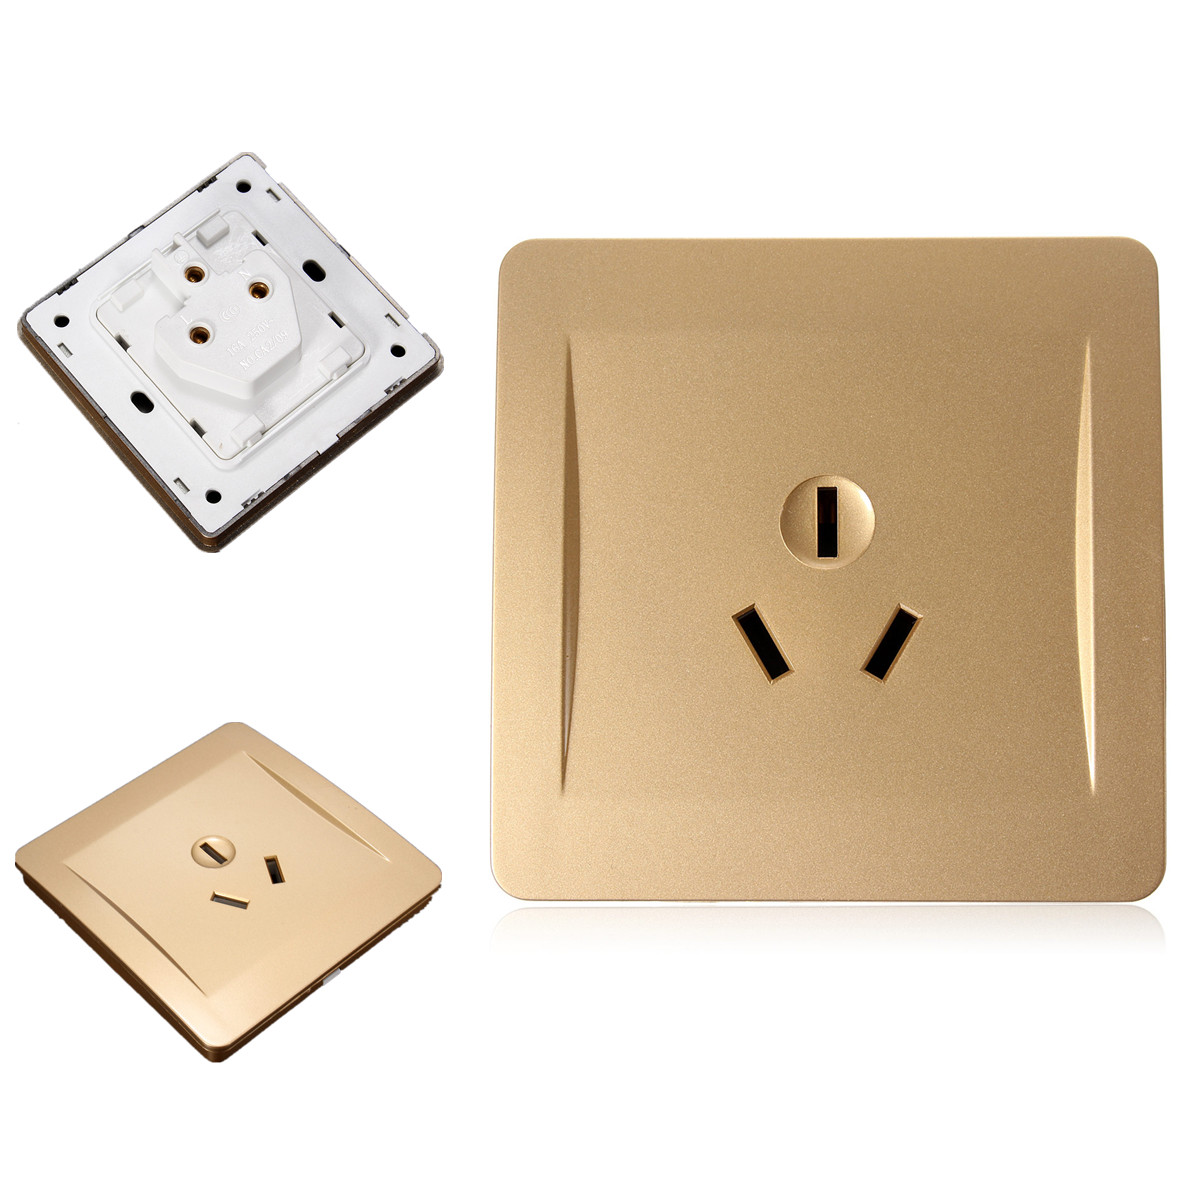 AC110-250V-Electric-Wall-Charger-Switch-Socket-Adapter-Power-Outlet-Panel-Faceplate-AU-Plug-1280814-3